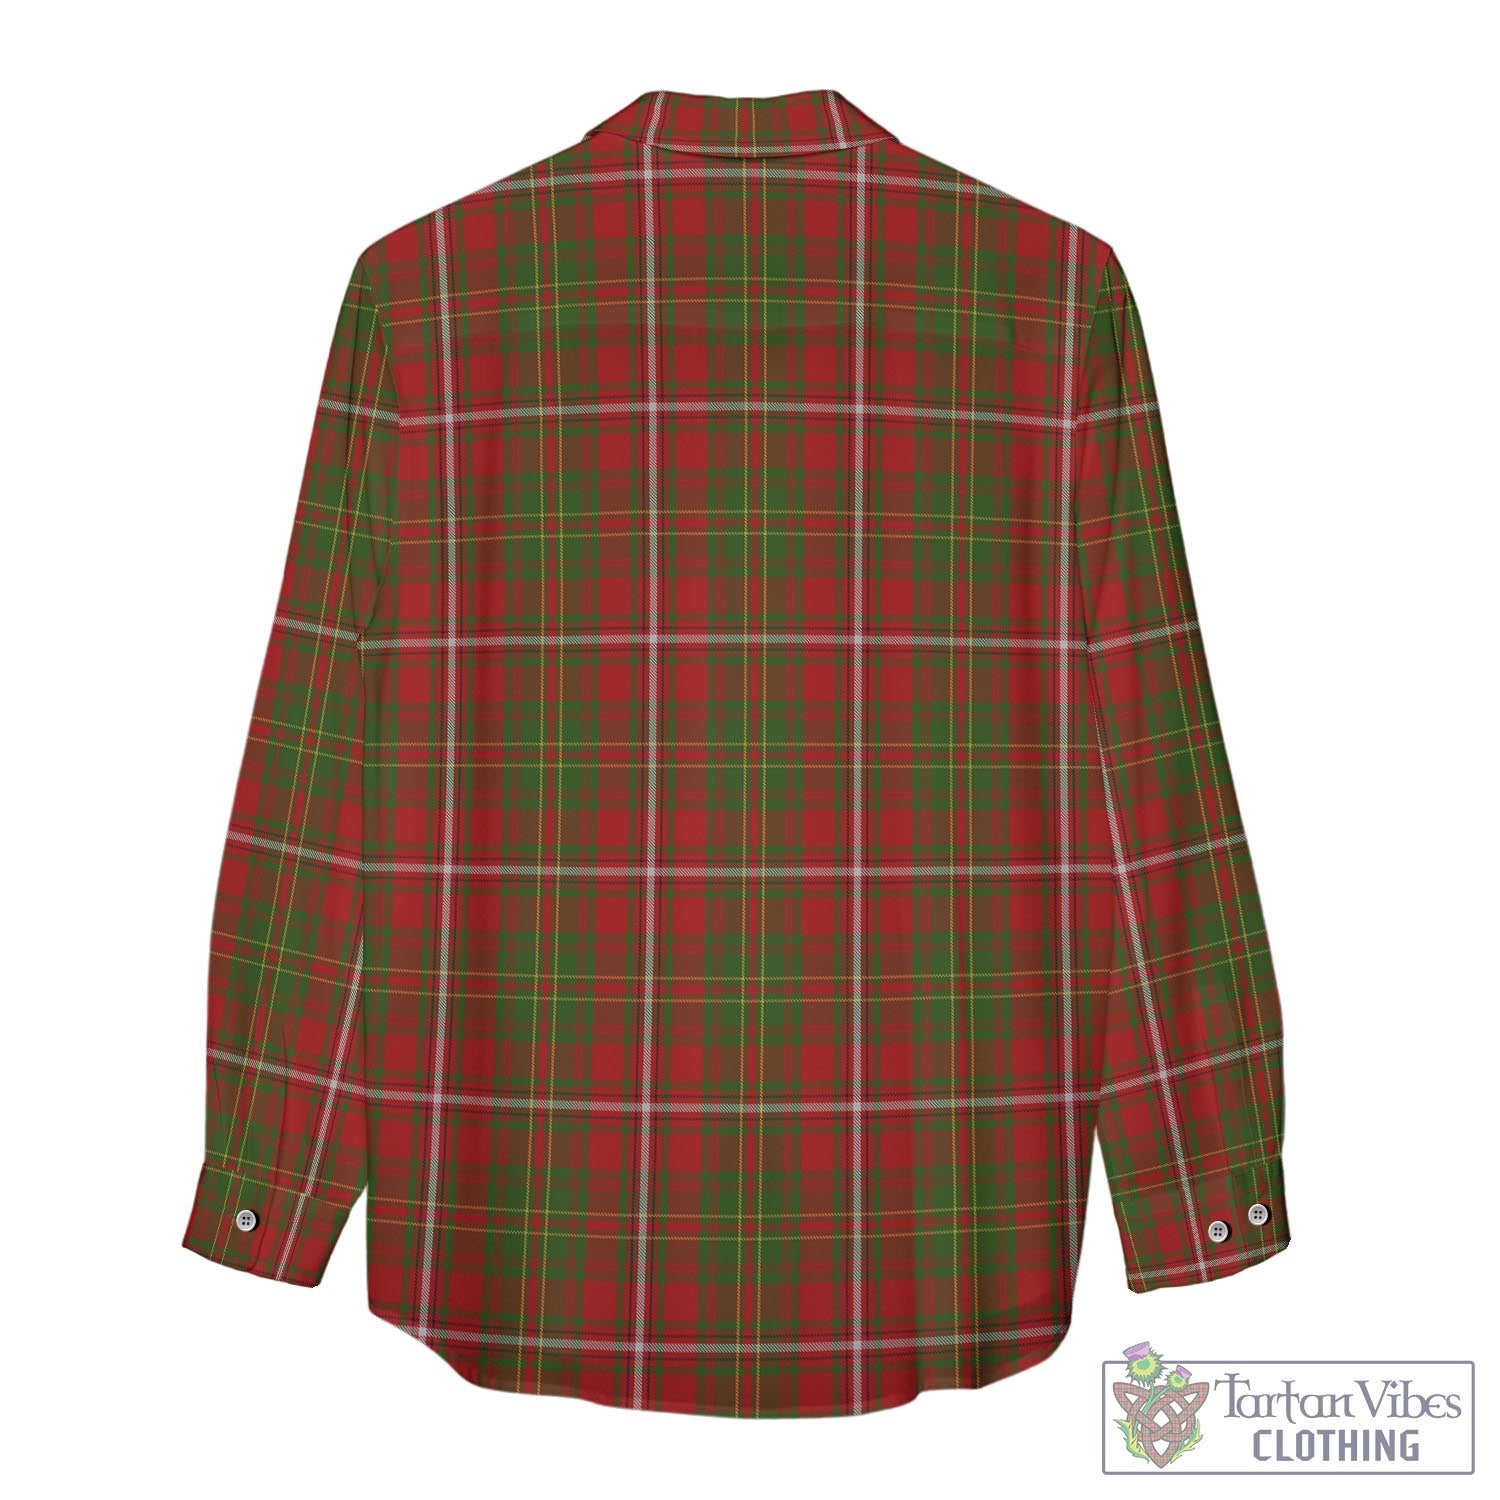 Tartan Vibes Clothing Hay Tartan Womens Casual Shirt with Family Crest